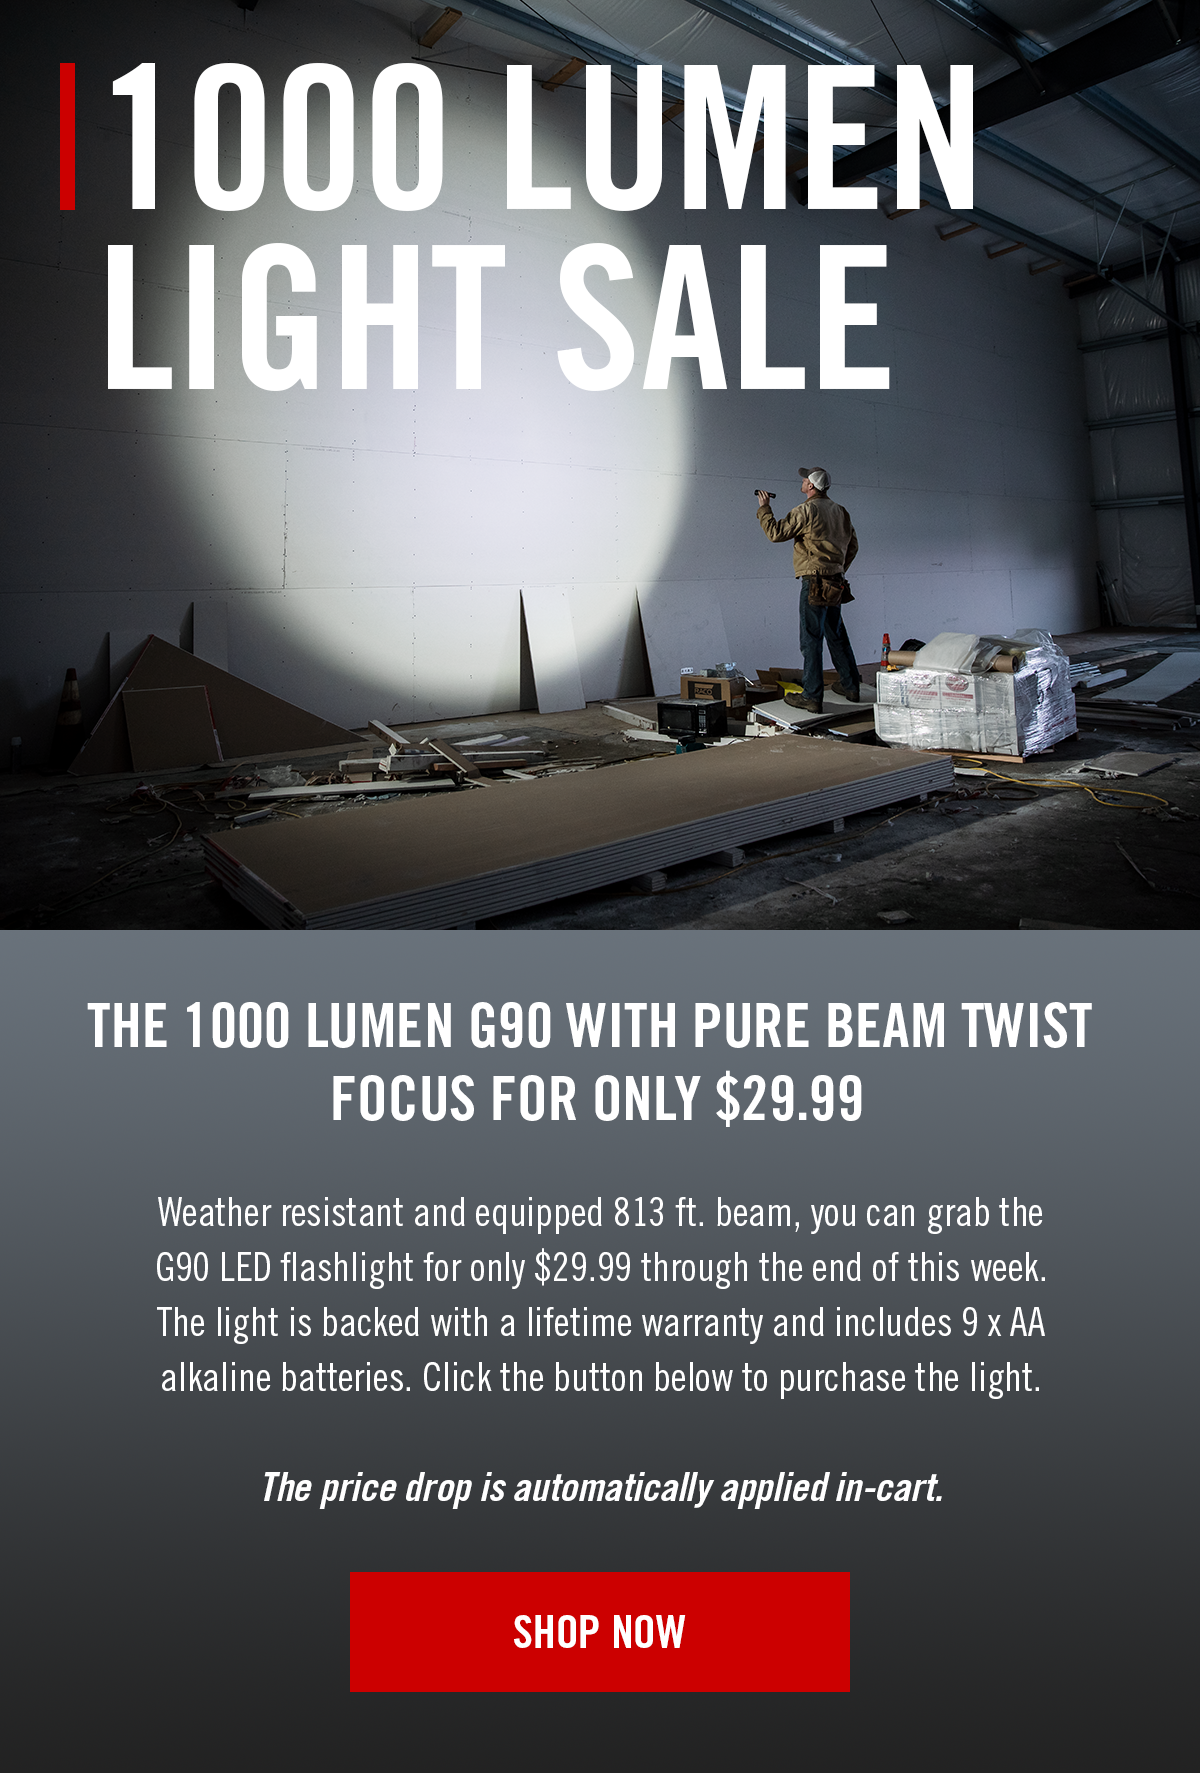 Purchase the G90 1000 Lumen Focusing Flashlight for only $29.99